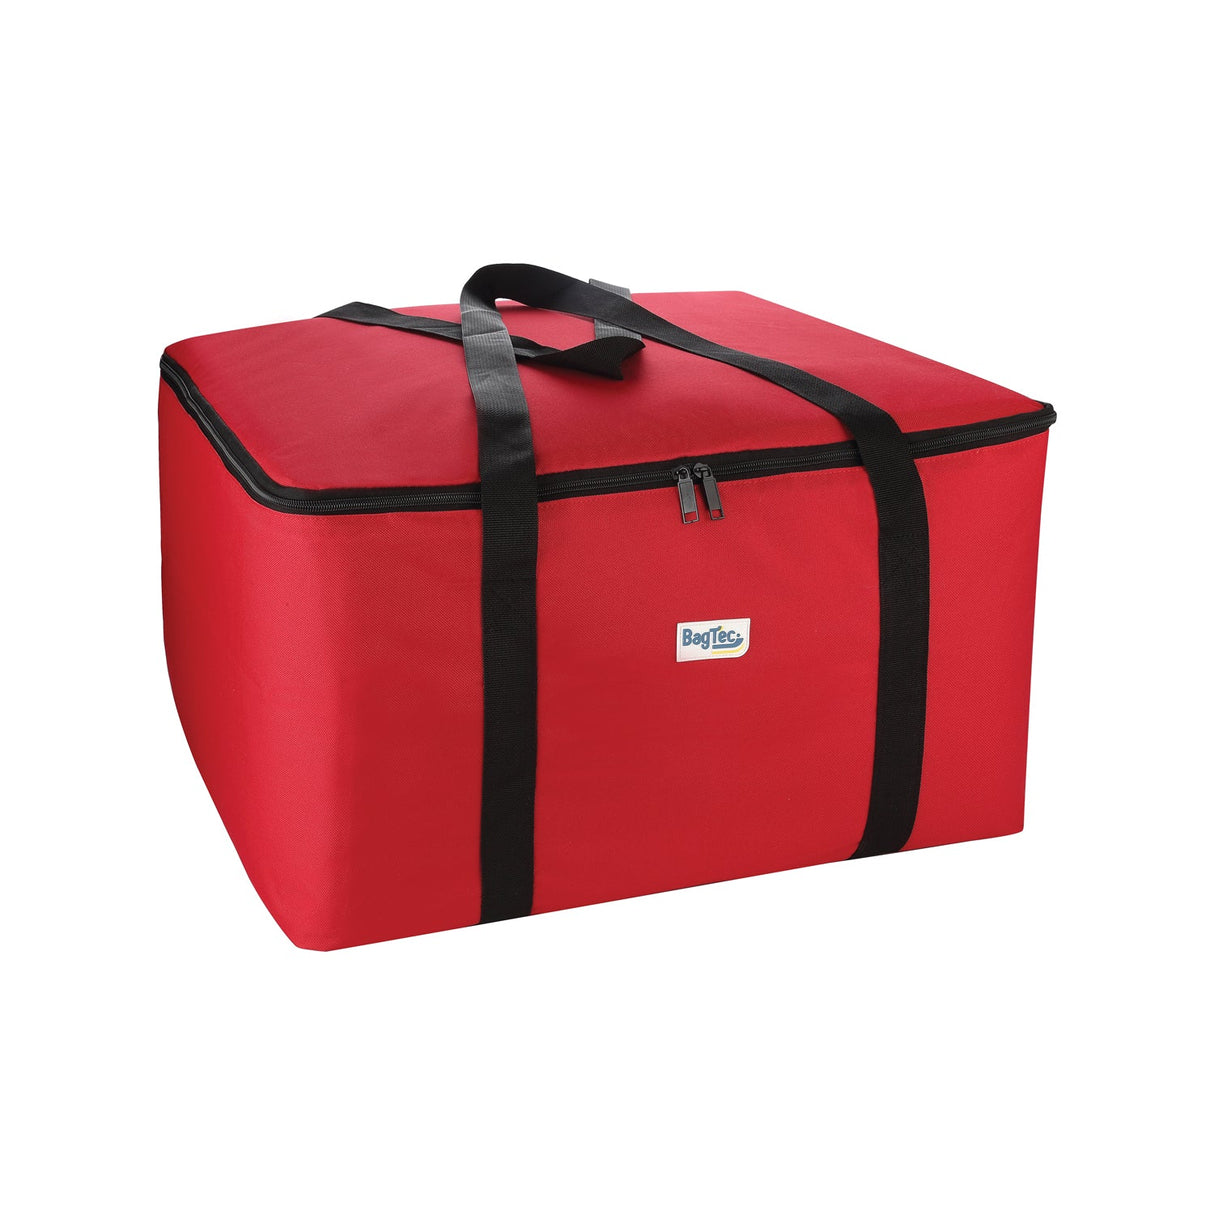 BagTec Dlv. Bag Catering Red 22x22x12"